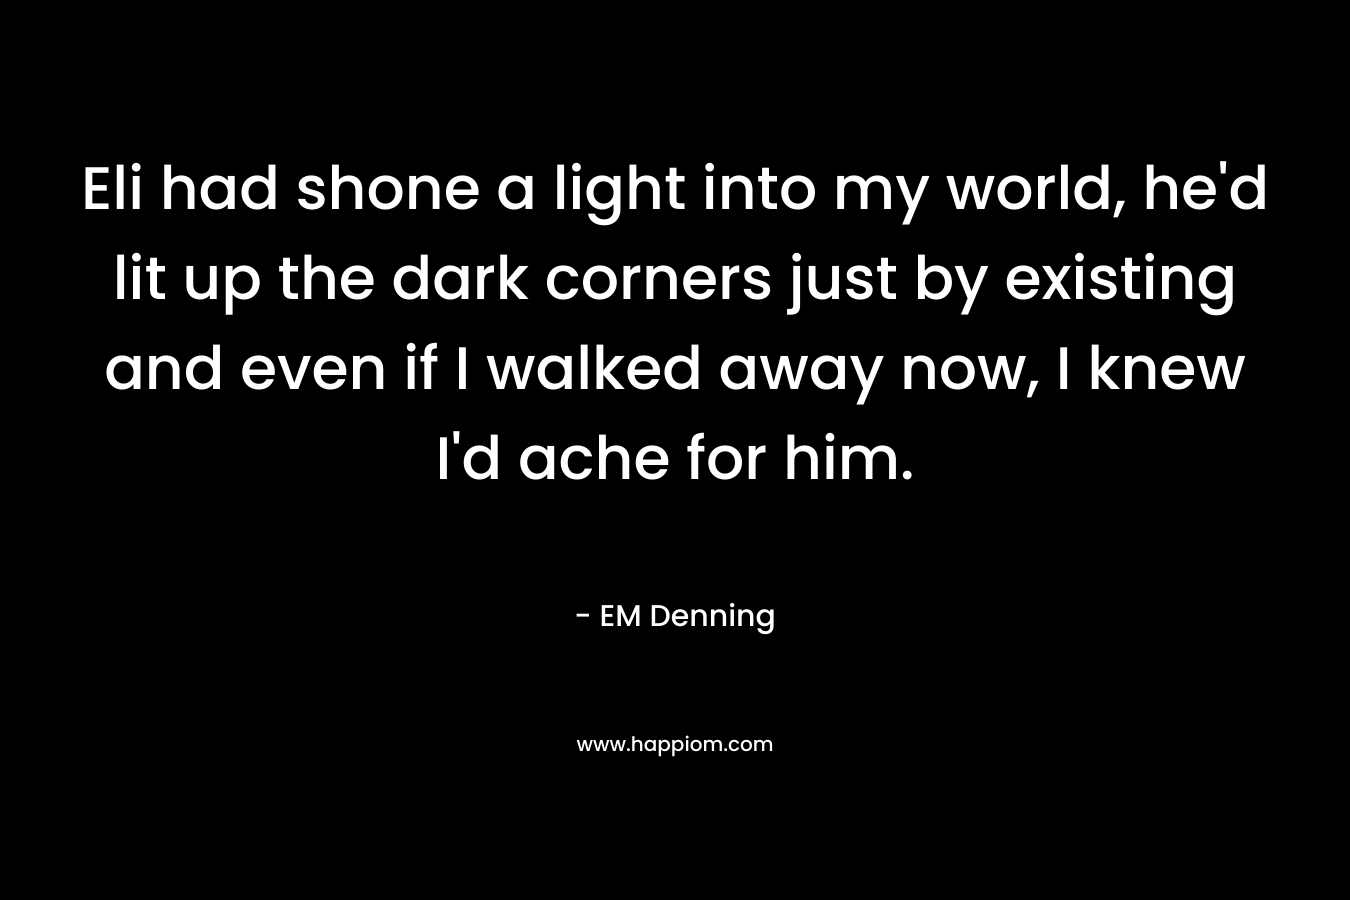 Eli had shone a light into my world, he’d lit up the dark corners just by existing and even if I walked away now, I knew I’d ache for him. – EM Denning